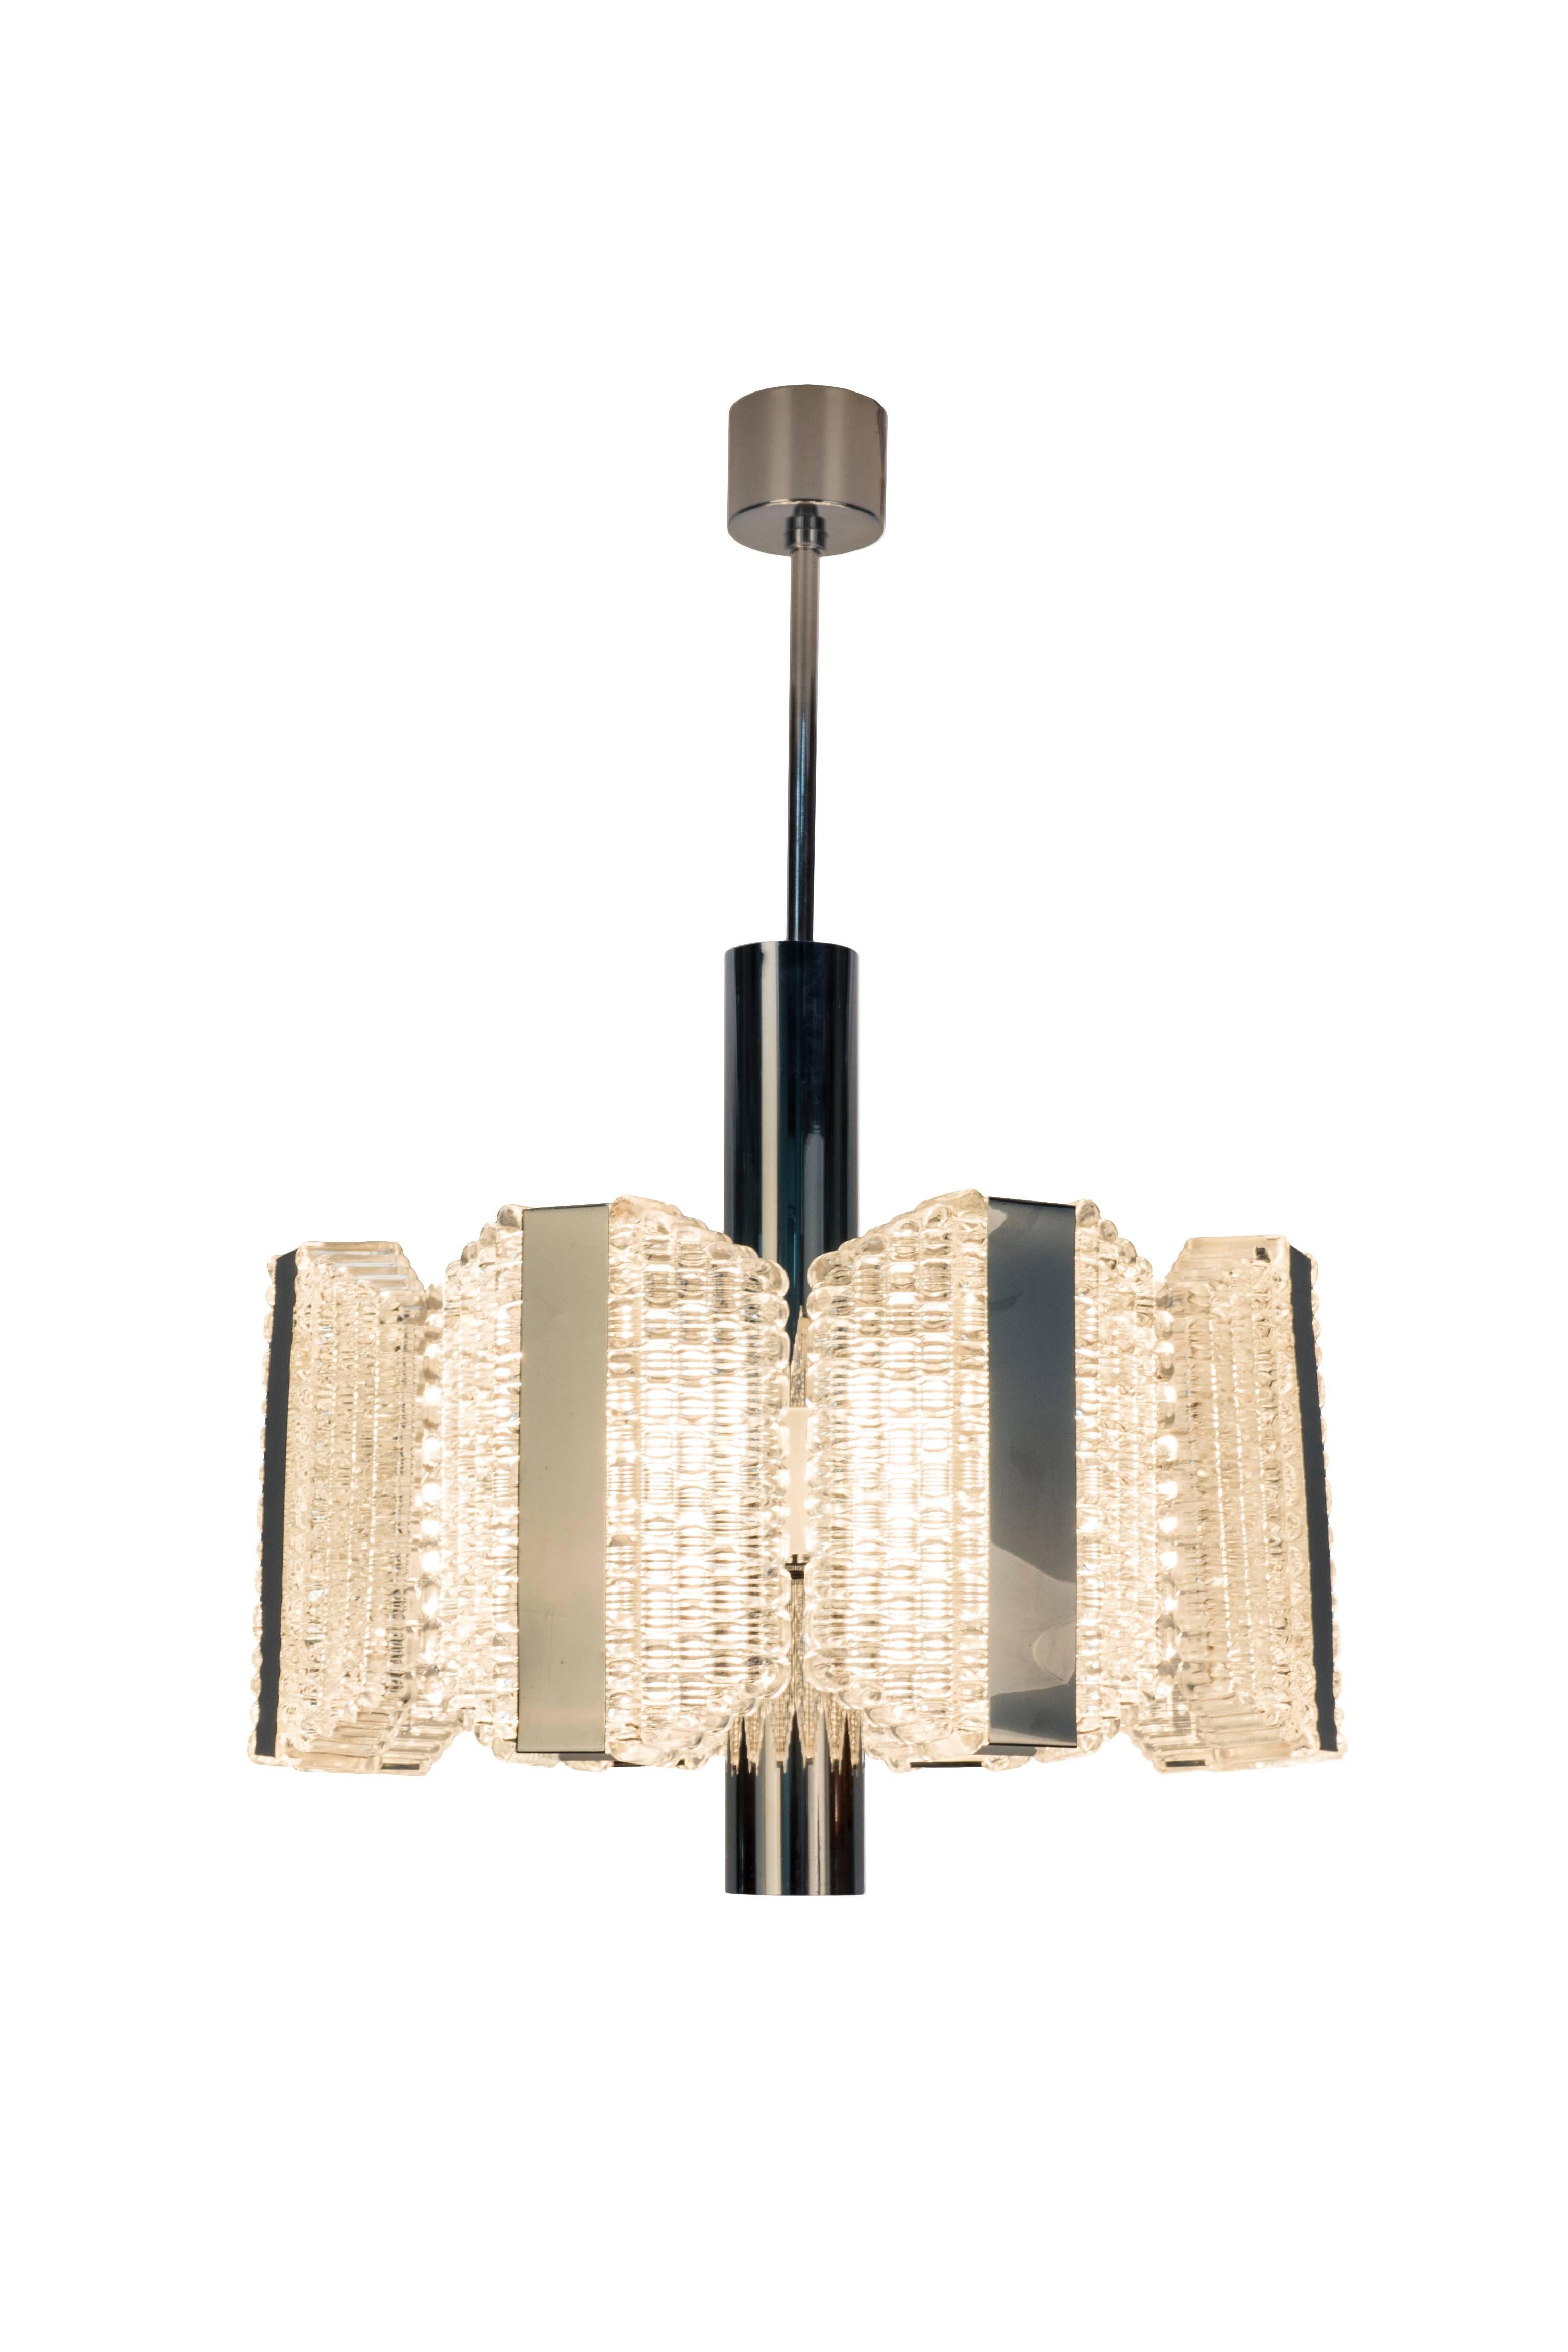 This sensational Grand Skyscraper Mid-Century Modernist chandelier was designed by Kaiser Leuchten. It features an octagonal shape, textured relief glass design and chrome banding detail. It has been completely rewired and is in excellent